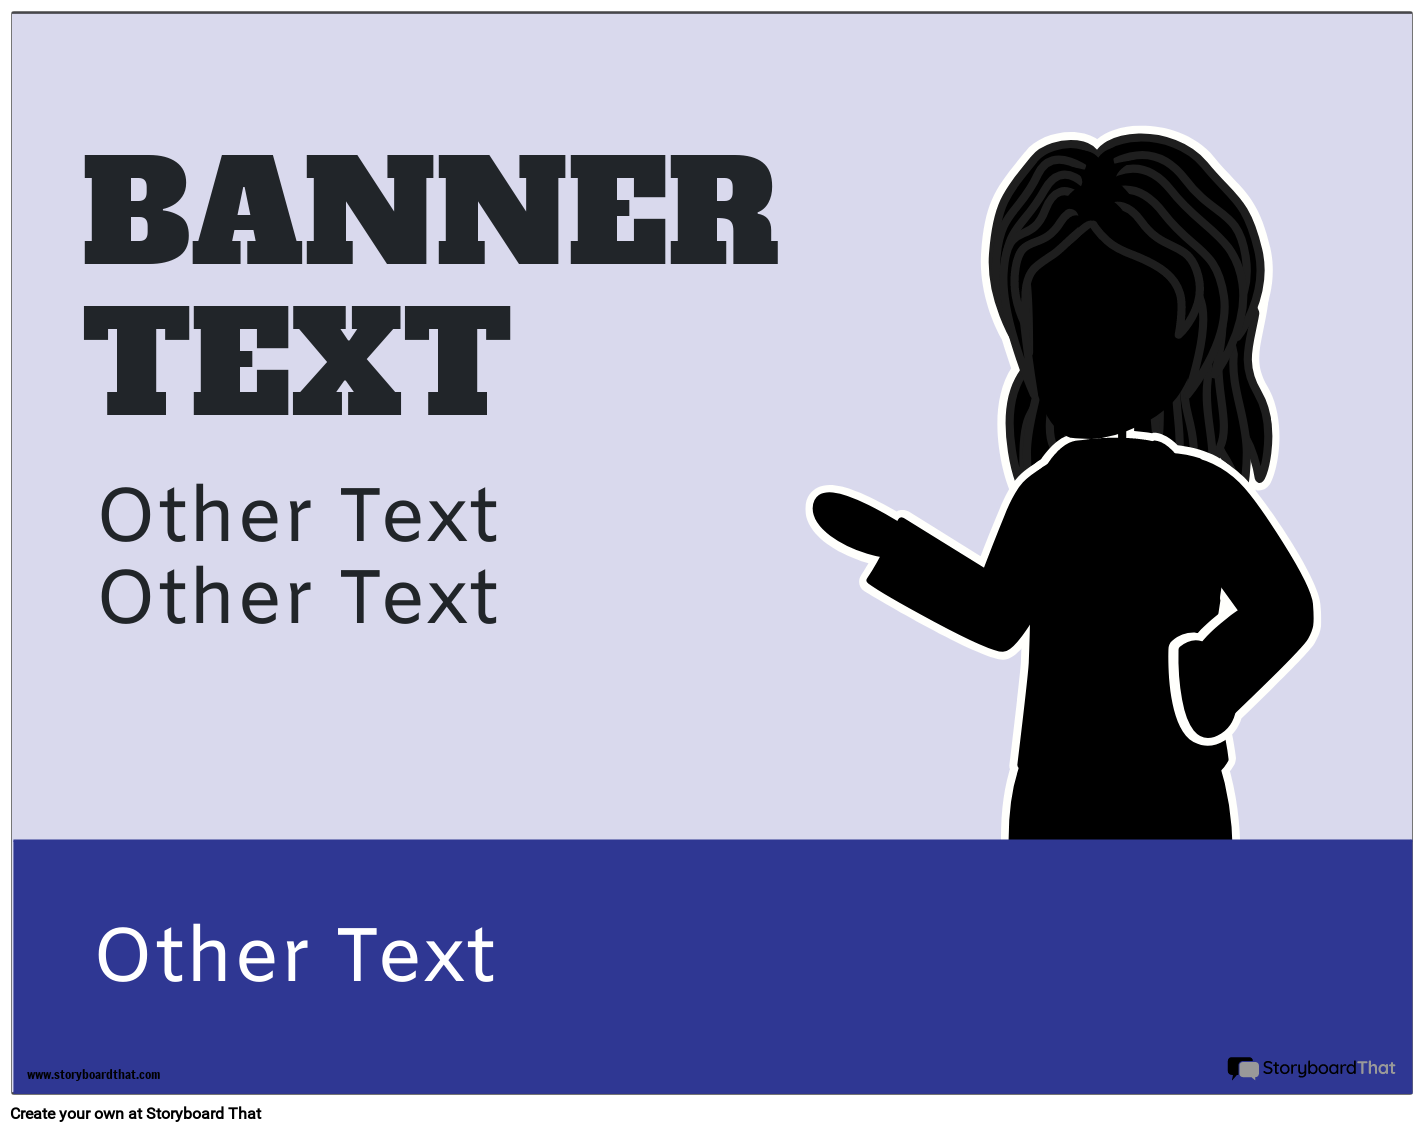 Banner Template with a Character Silhouette